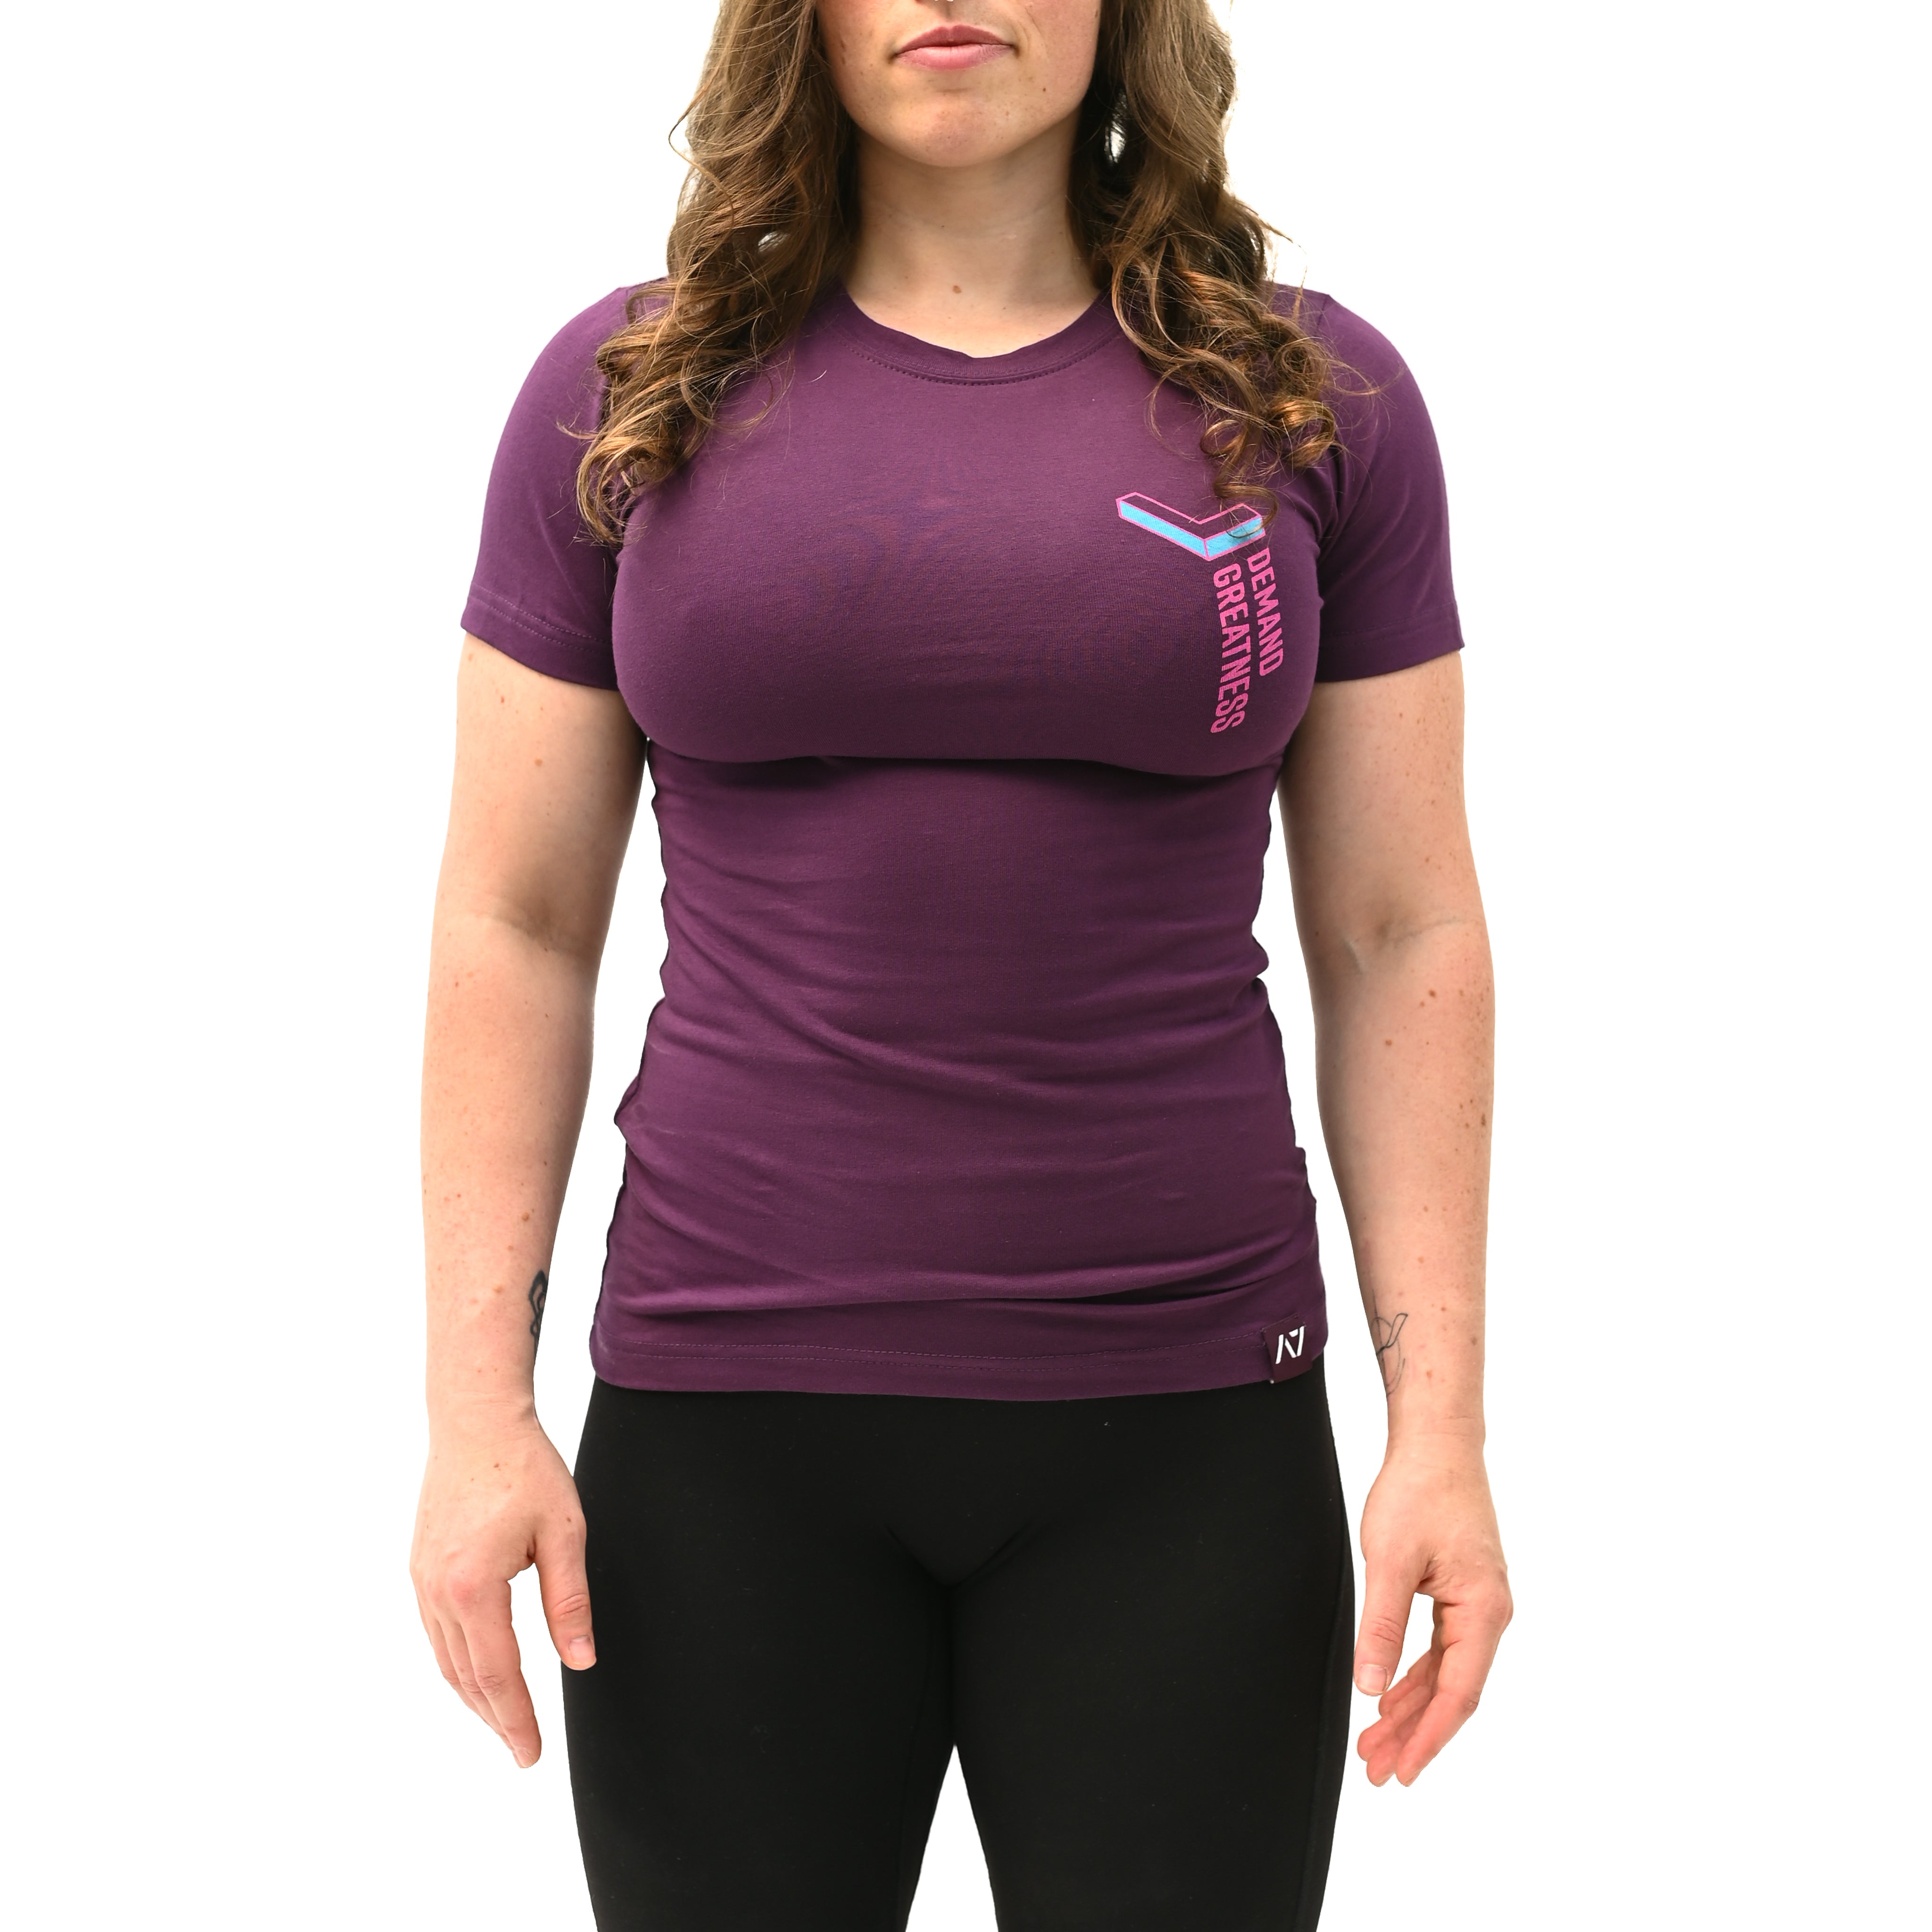 Ascend Berry Non Bar Grip T-Shirt is perfect for in and out of the gym. Purchase Ascend Berry Non Bar Grip tshirt UK from A7 UK. Purchase Ascend Berry Shirt Europe from A7 UK. Best gymwear shipping to UK and Europe from A7 UK. Ascend Berry is our newest Non Bar Grip Design. The best Powerlifting apparel for all your workouts. Available in UK and Europe including France, Italy, Germany, Sweden and Poland.